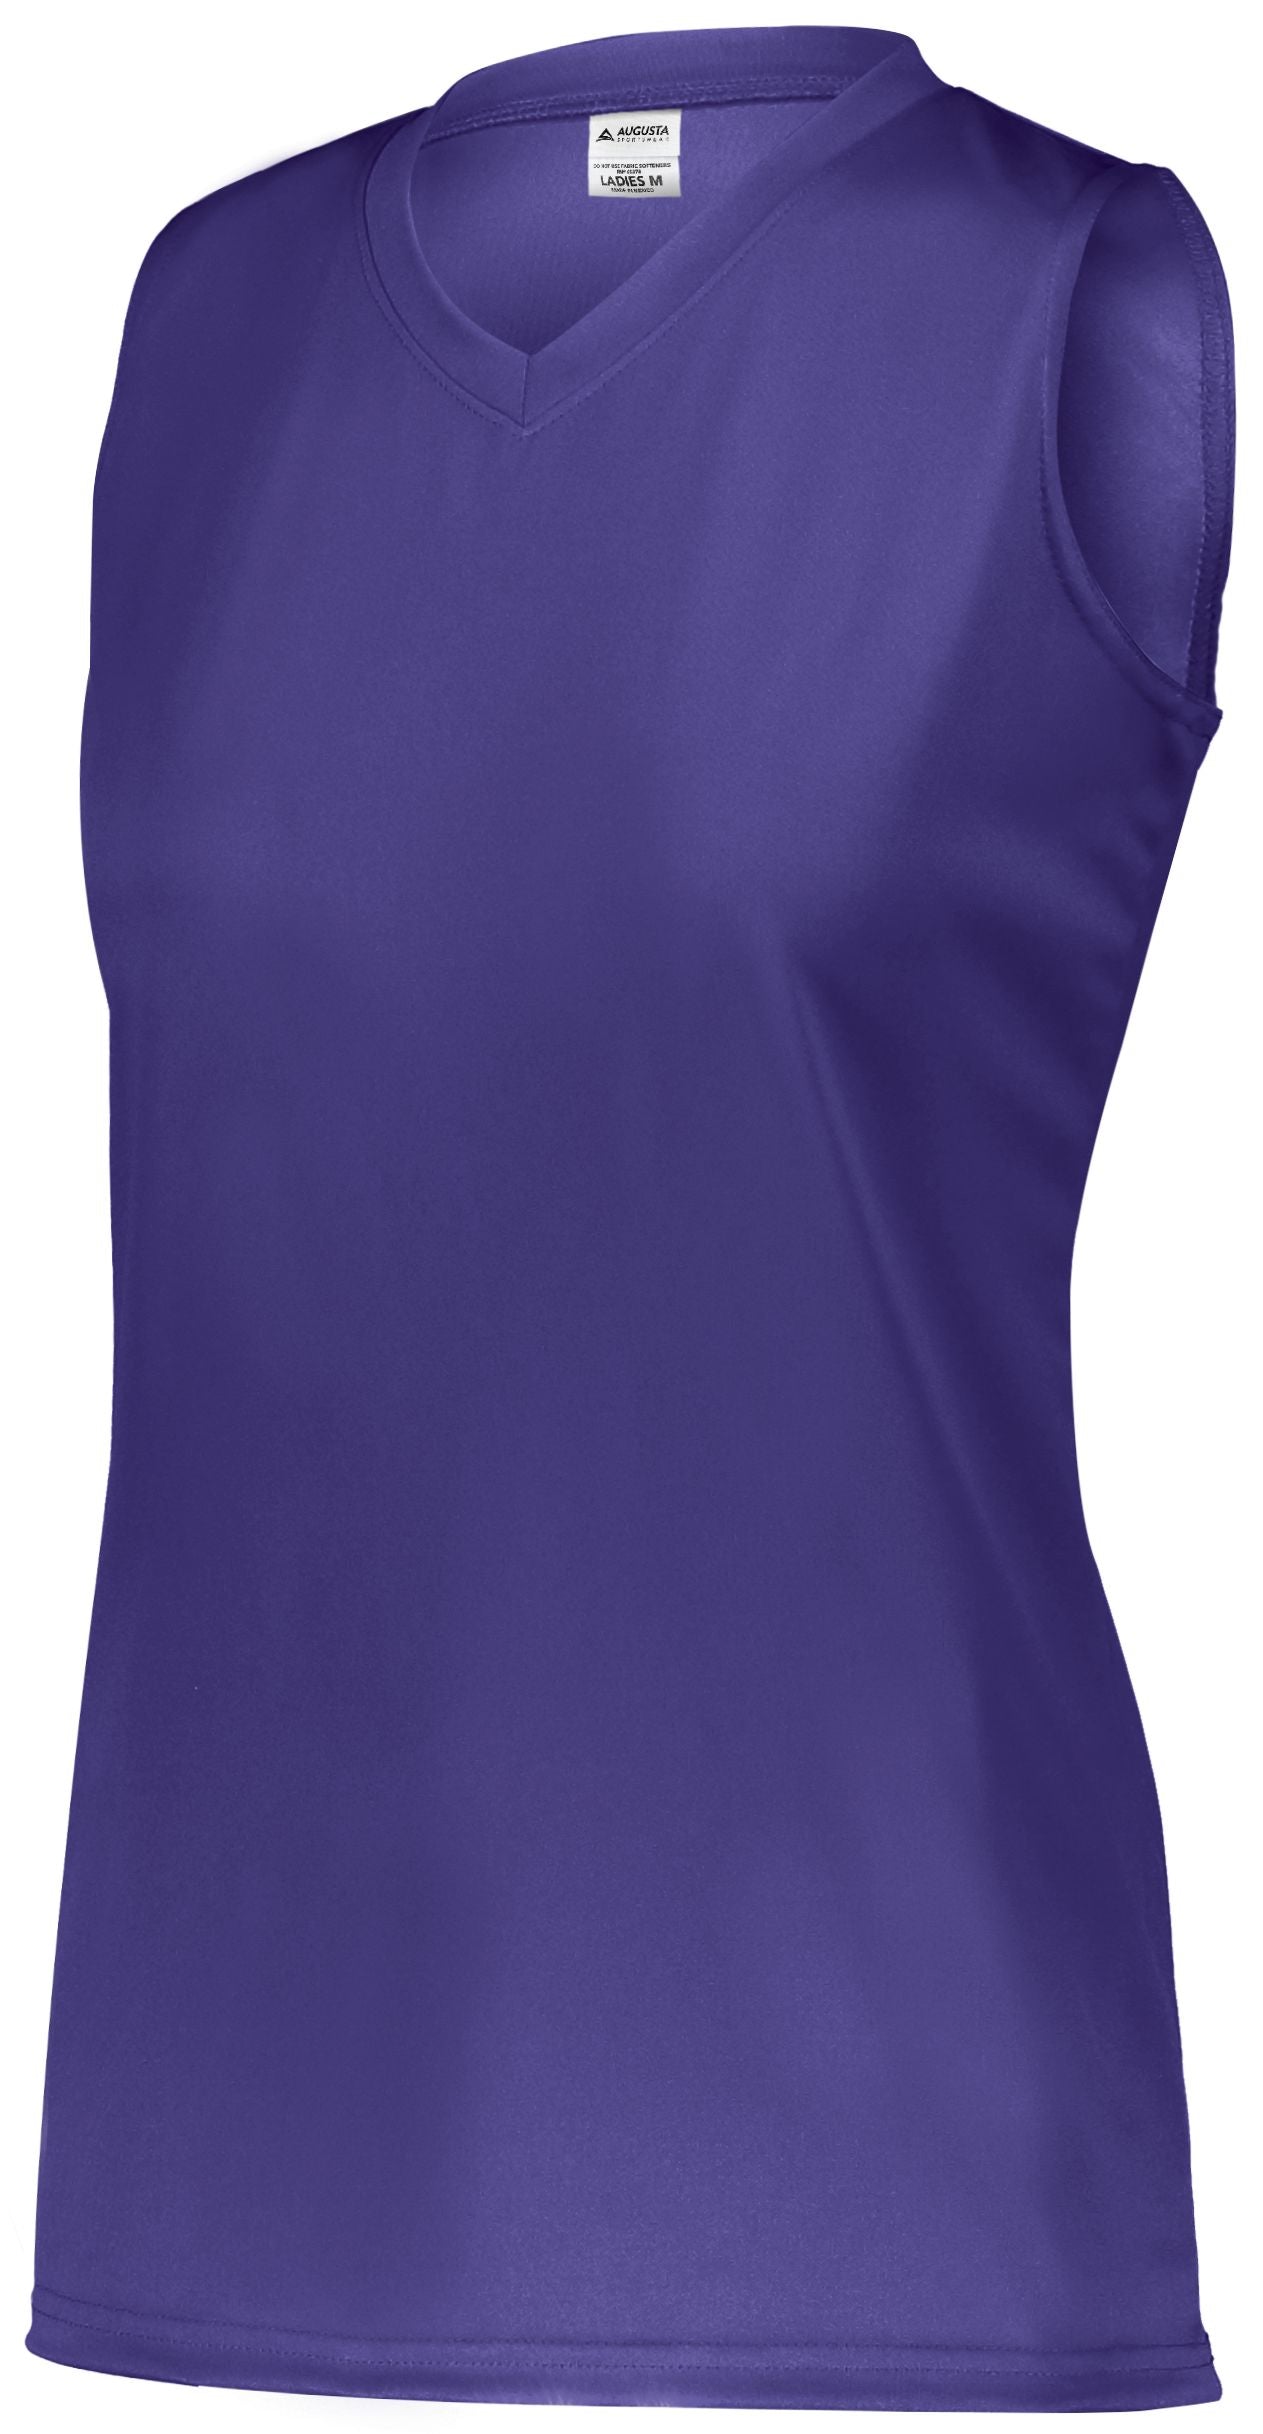 Augusta Sportswear Ladies Attain Wicking Sleeveless Jersey in Purple (Hlw)  -Part of the Ladies, Ladies-Jersey, Augusta-Products, Softball, Shirts product lines at KanaleyCreations.com